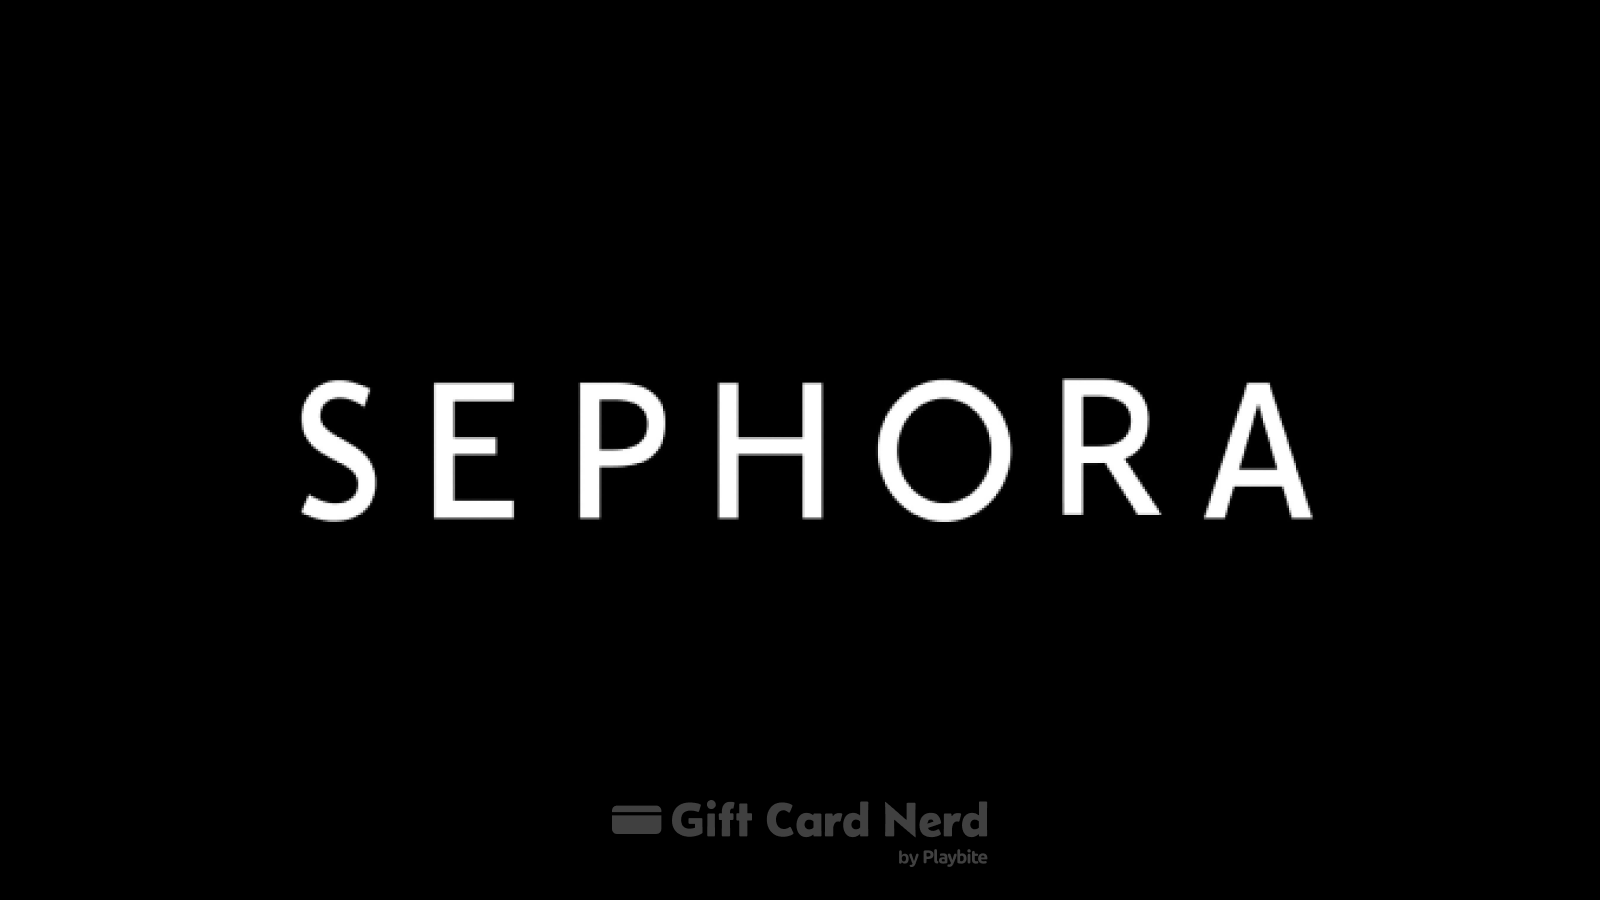 Can I Use a Sephora Gift Card on Google Play Store?